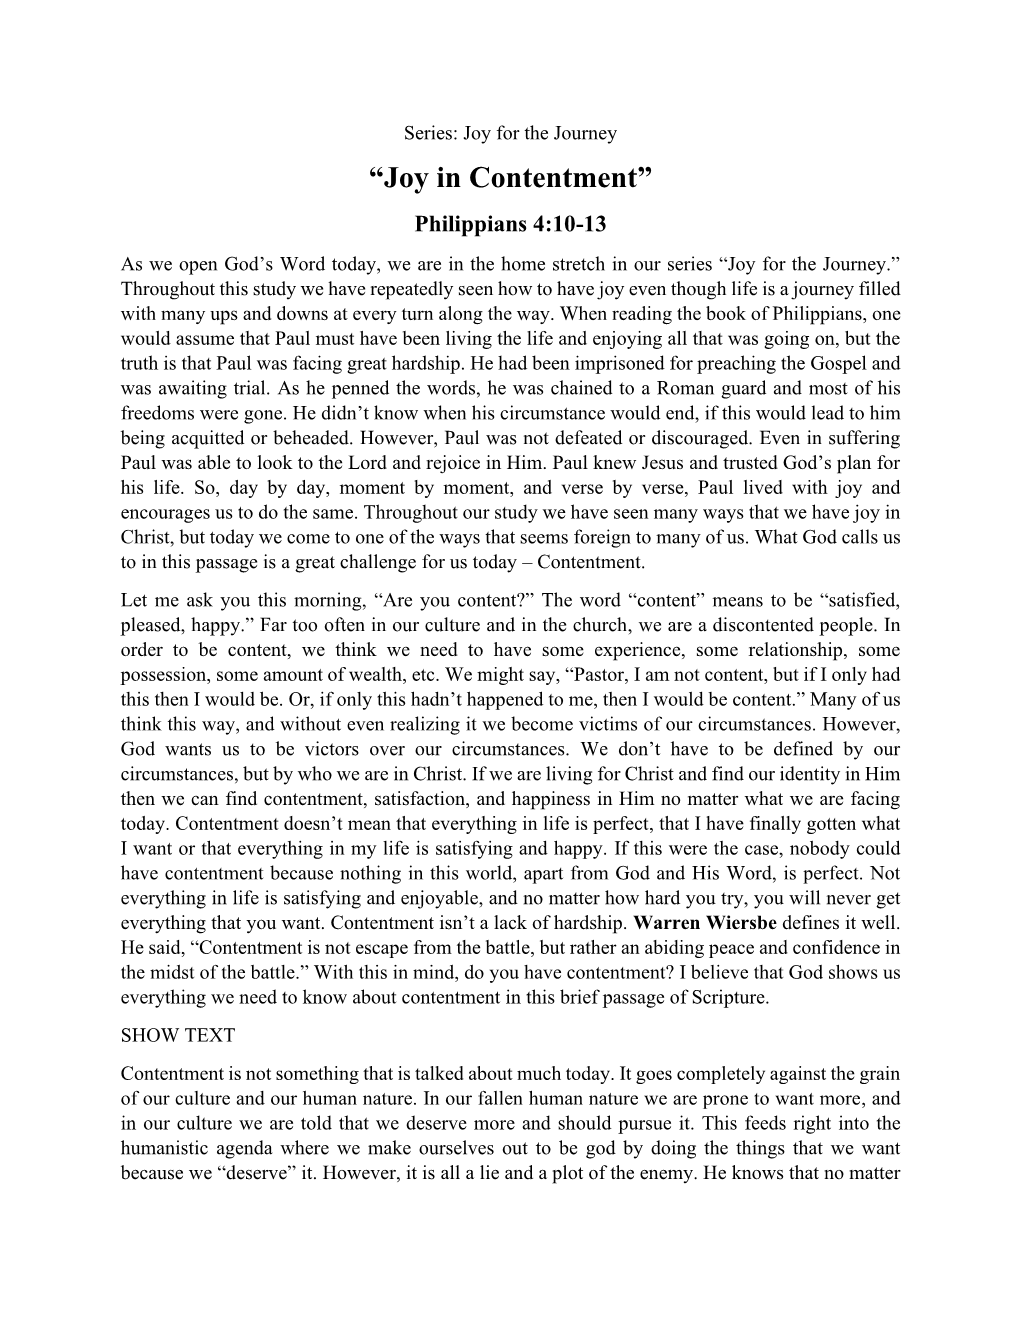 “Joy in Contentment”